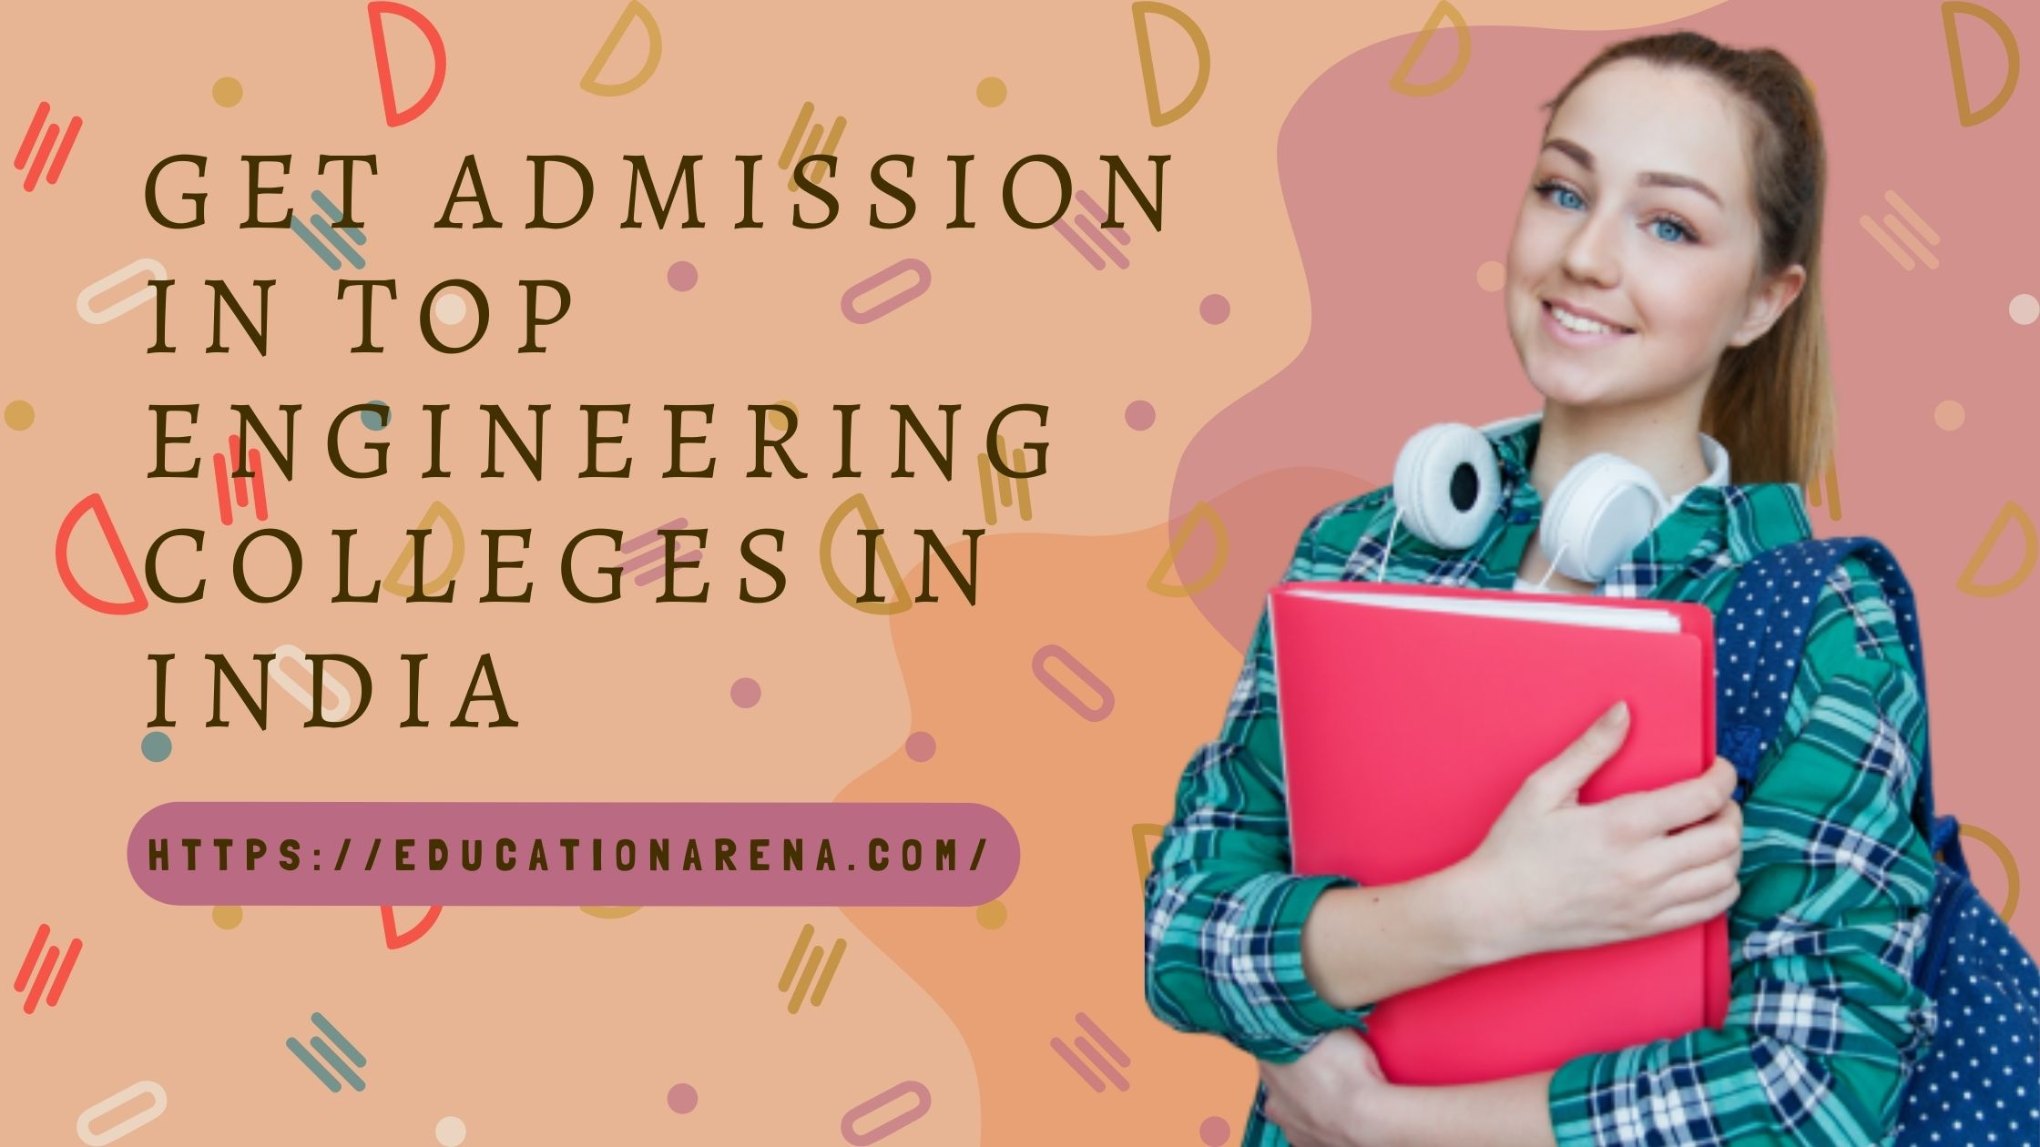 Get admission in top engineering colleges in india 